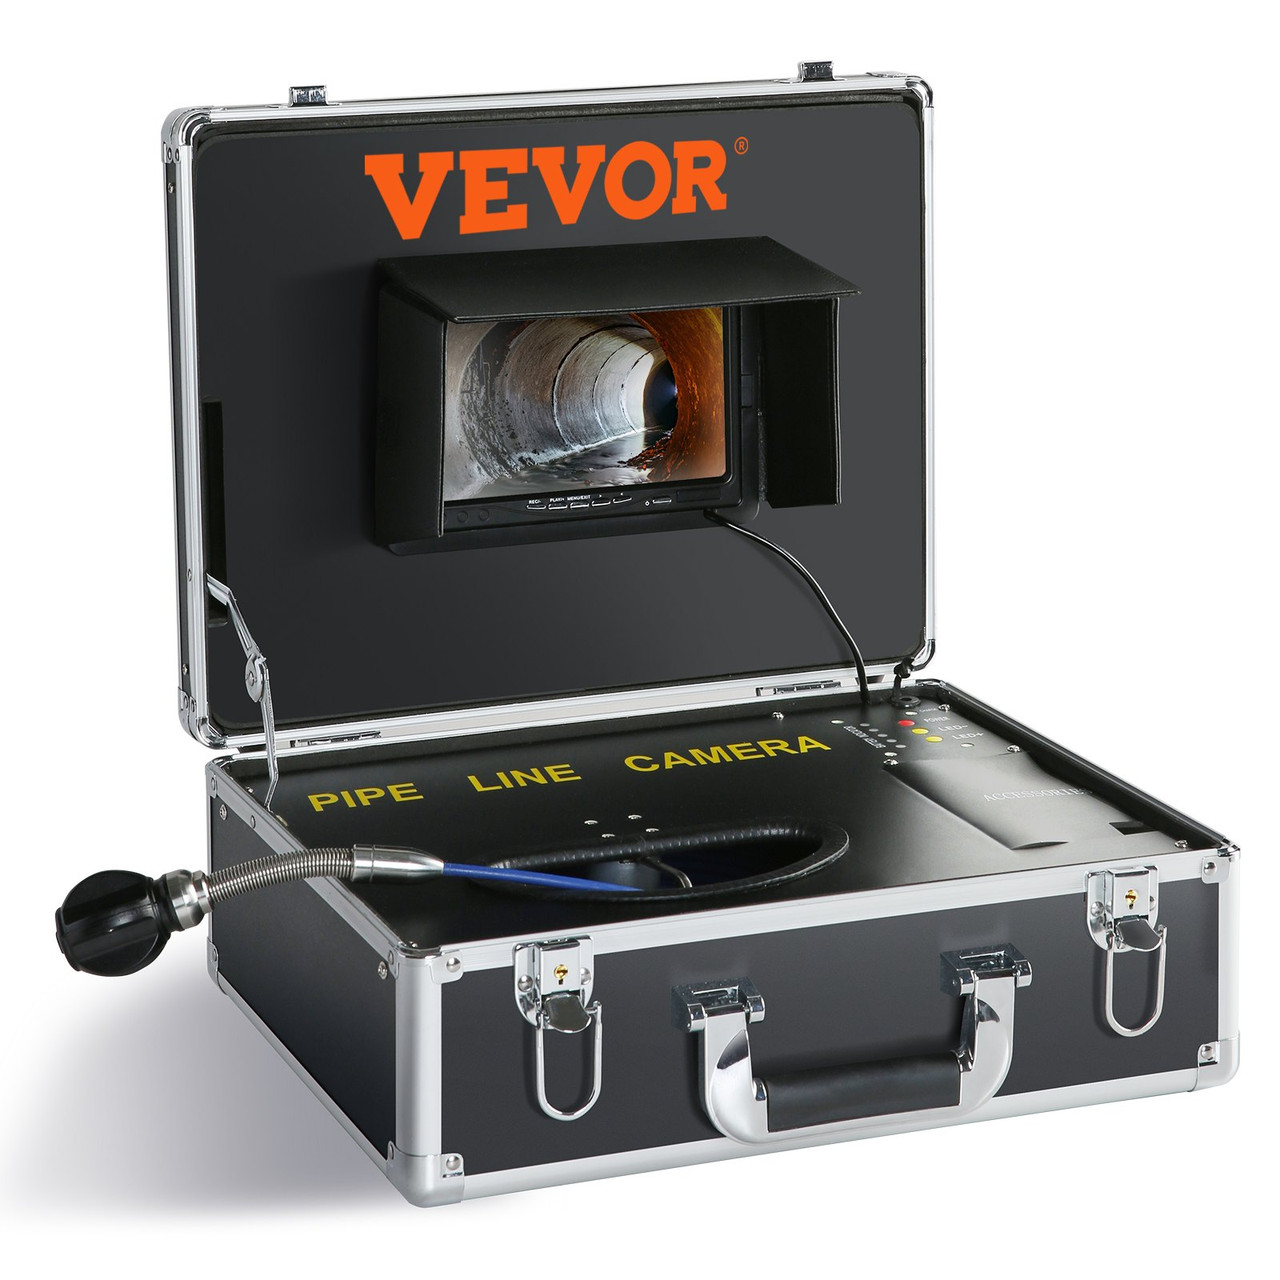 VEVOR Sewer Camera, 7" Screen Pipeline Inspection Camera with DVR Function, 66 ft/20 m Waterproof IP68 Camera, 12 pcs Adjustable LED, with a 16 GB SD Card for Sewer Line, Duct Drain Pipe Plumbing